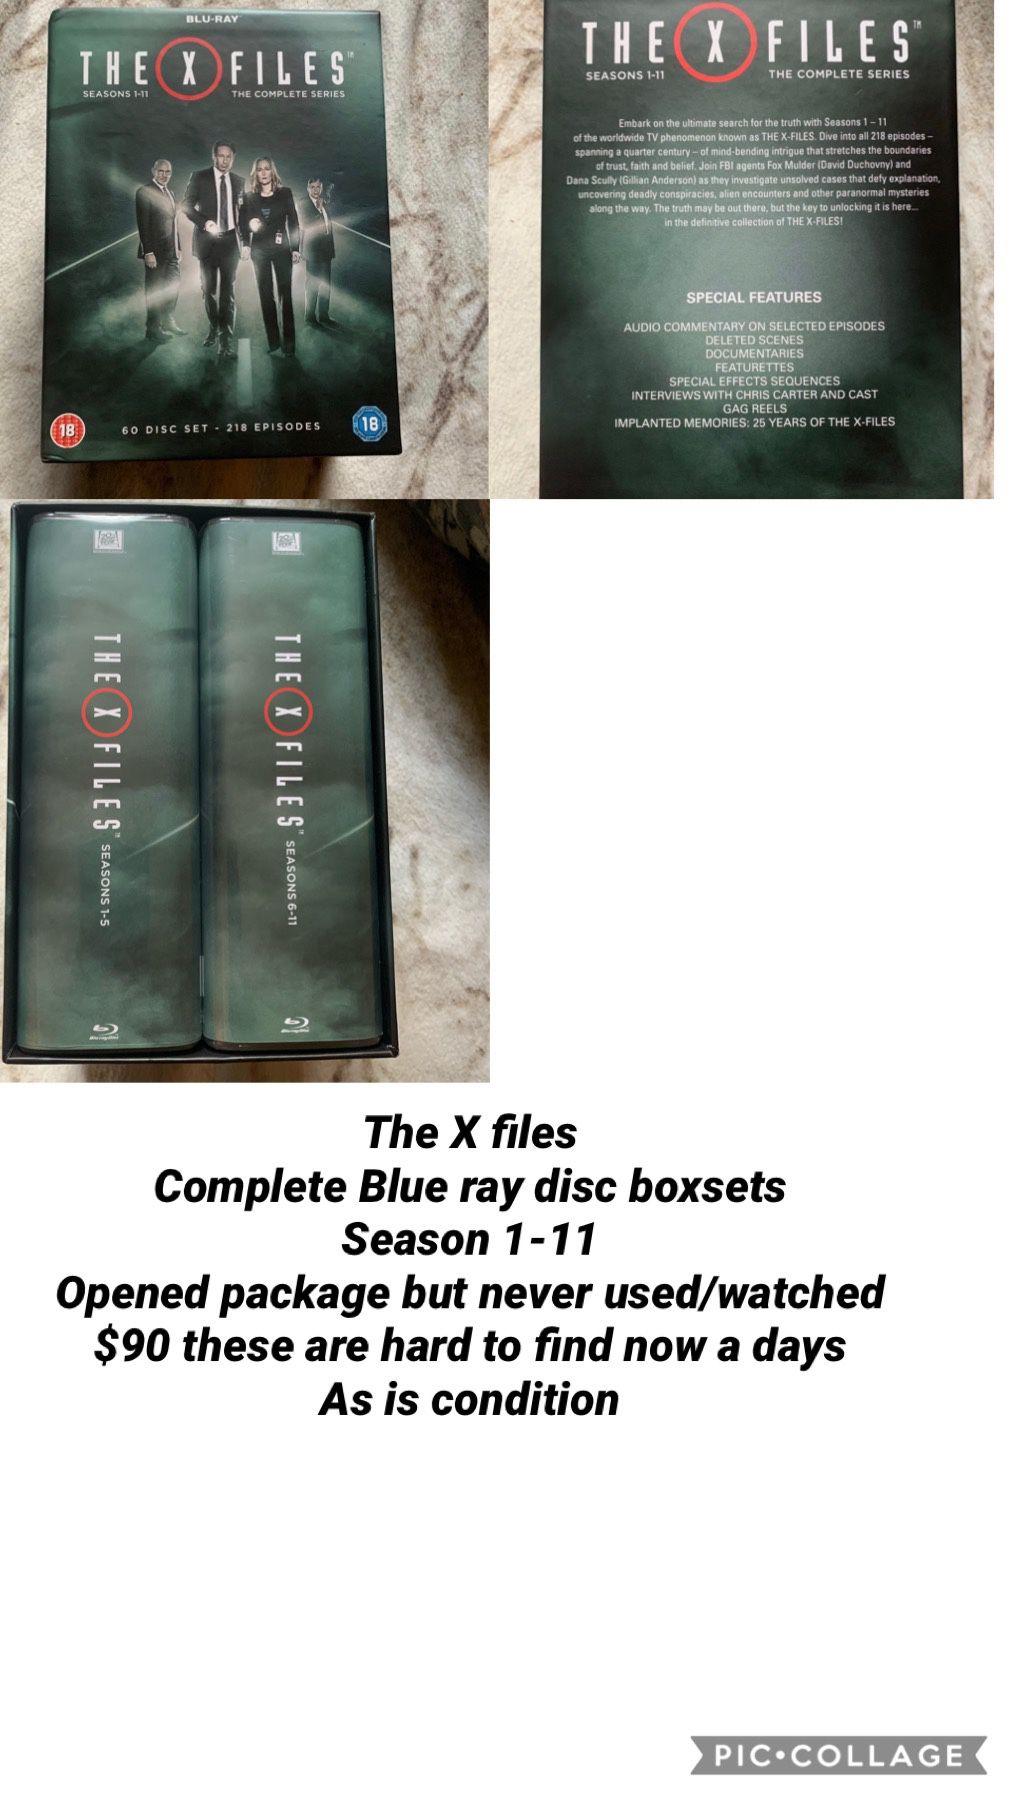 The X-Files complete blue ray series 1-11